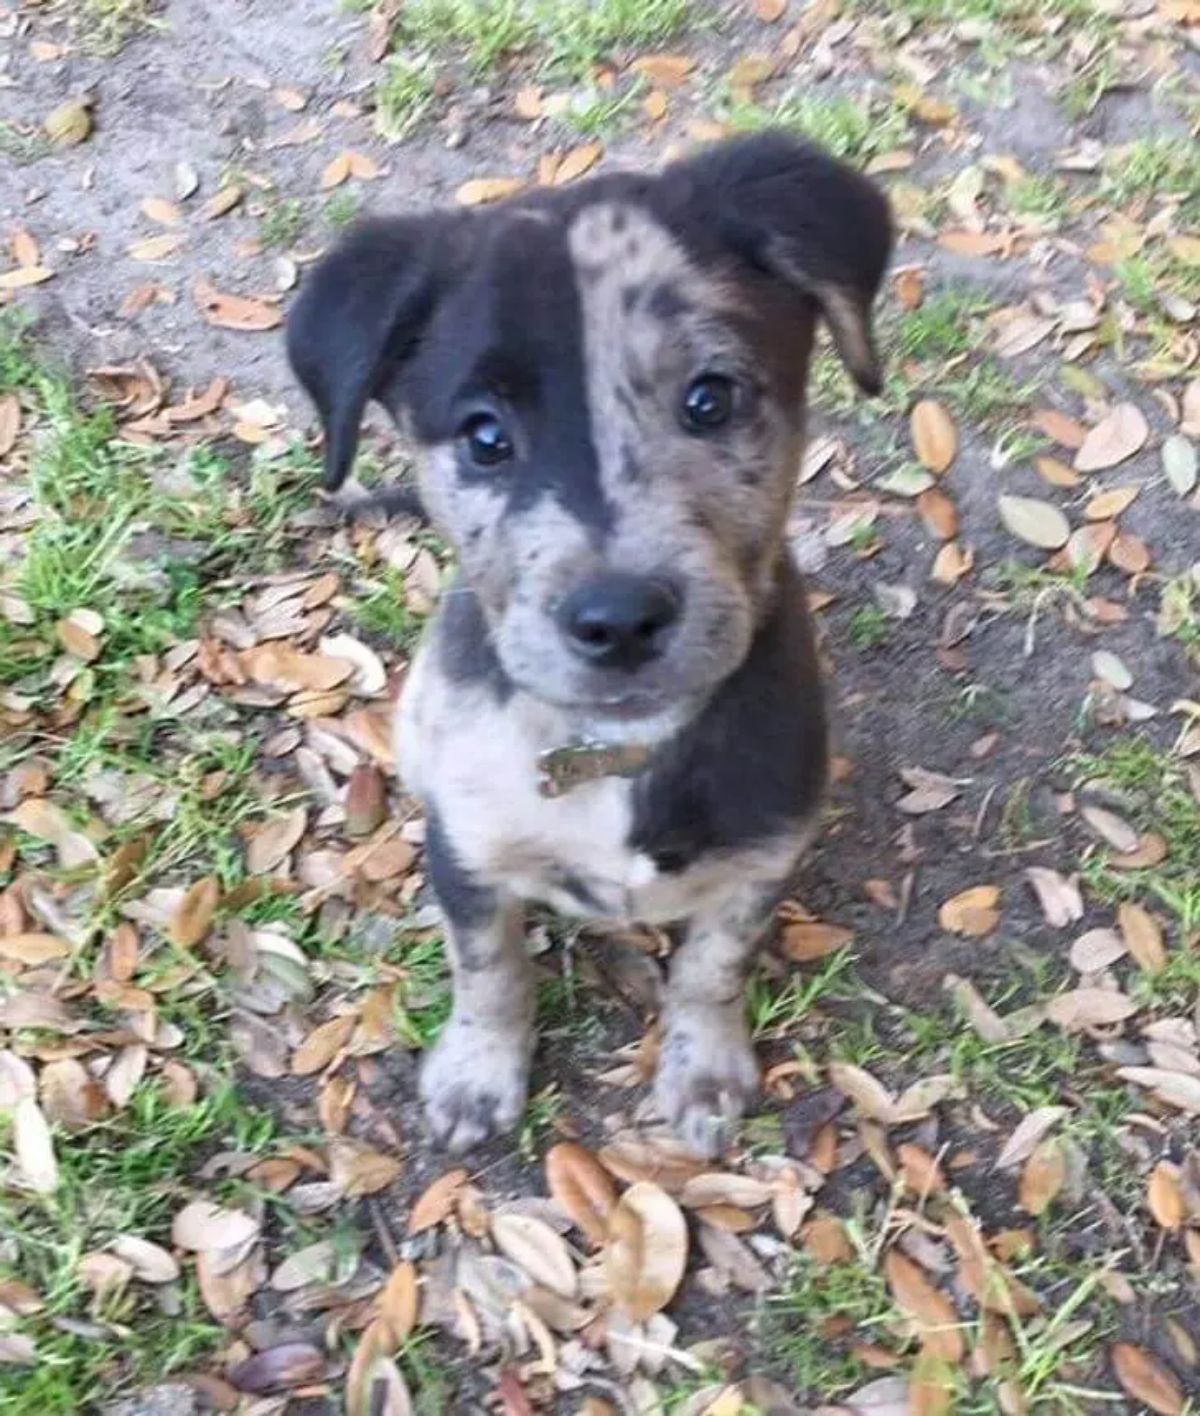 black grey and white puppy with black ears and a black marking from right ear to down to the right eye